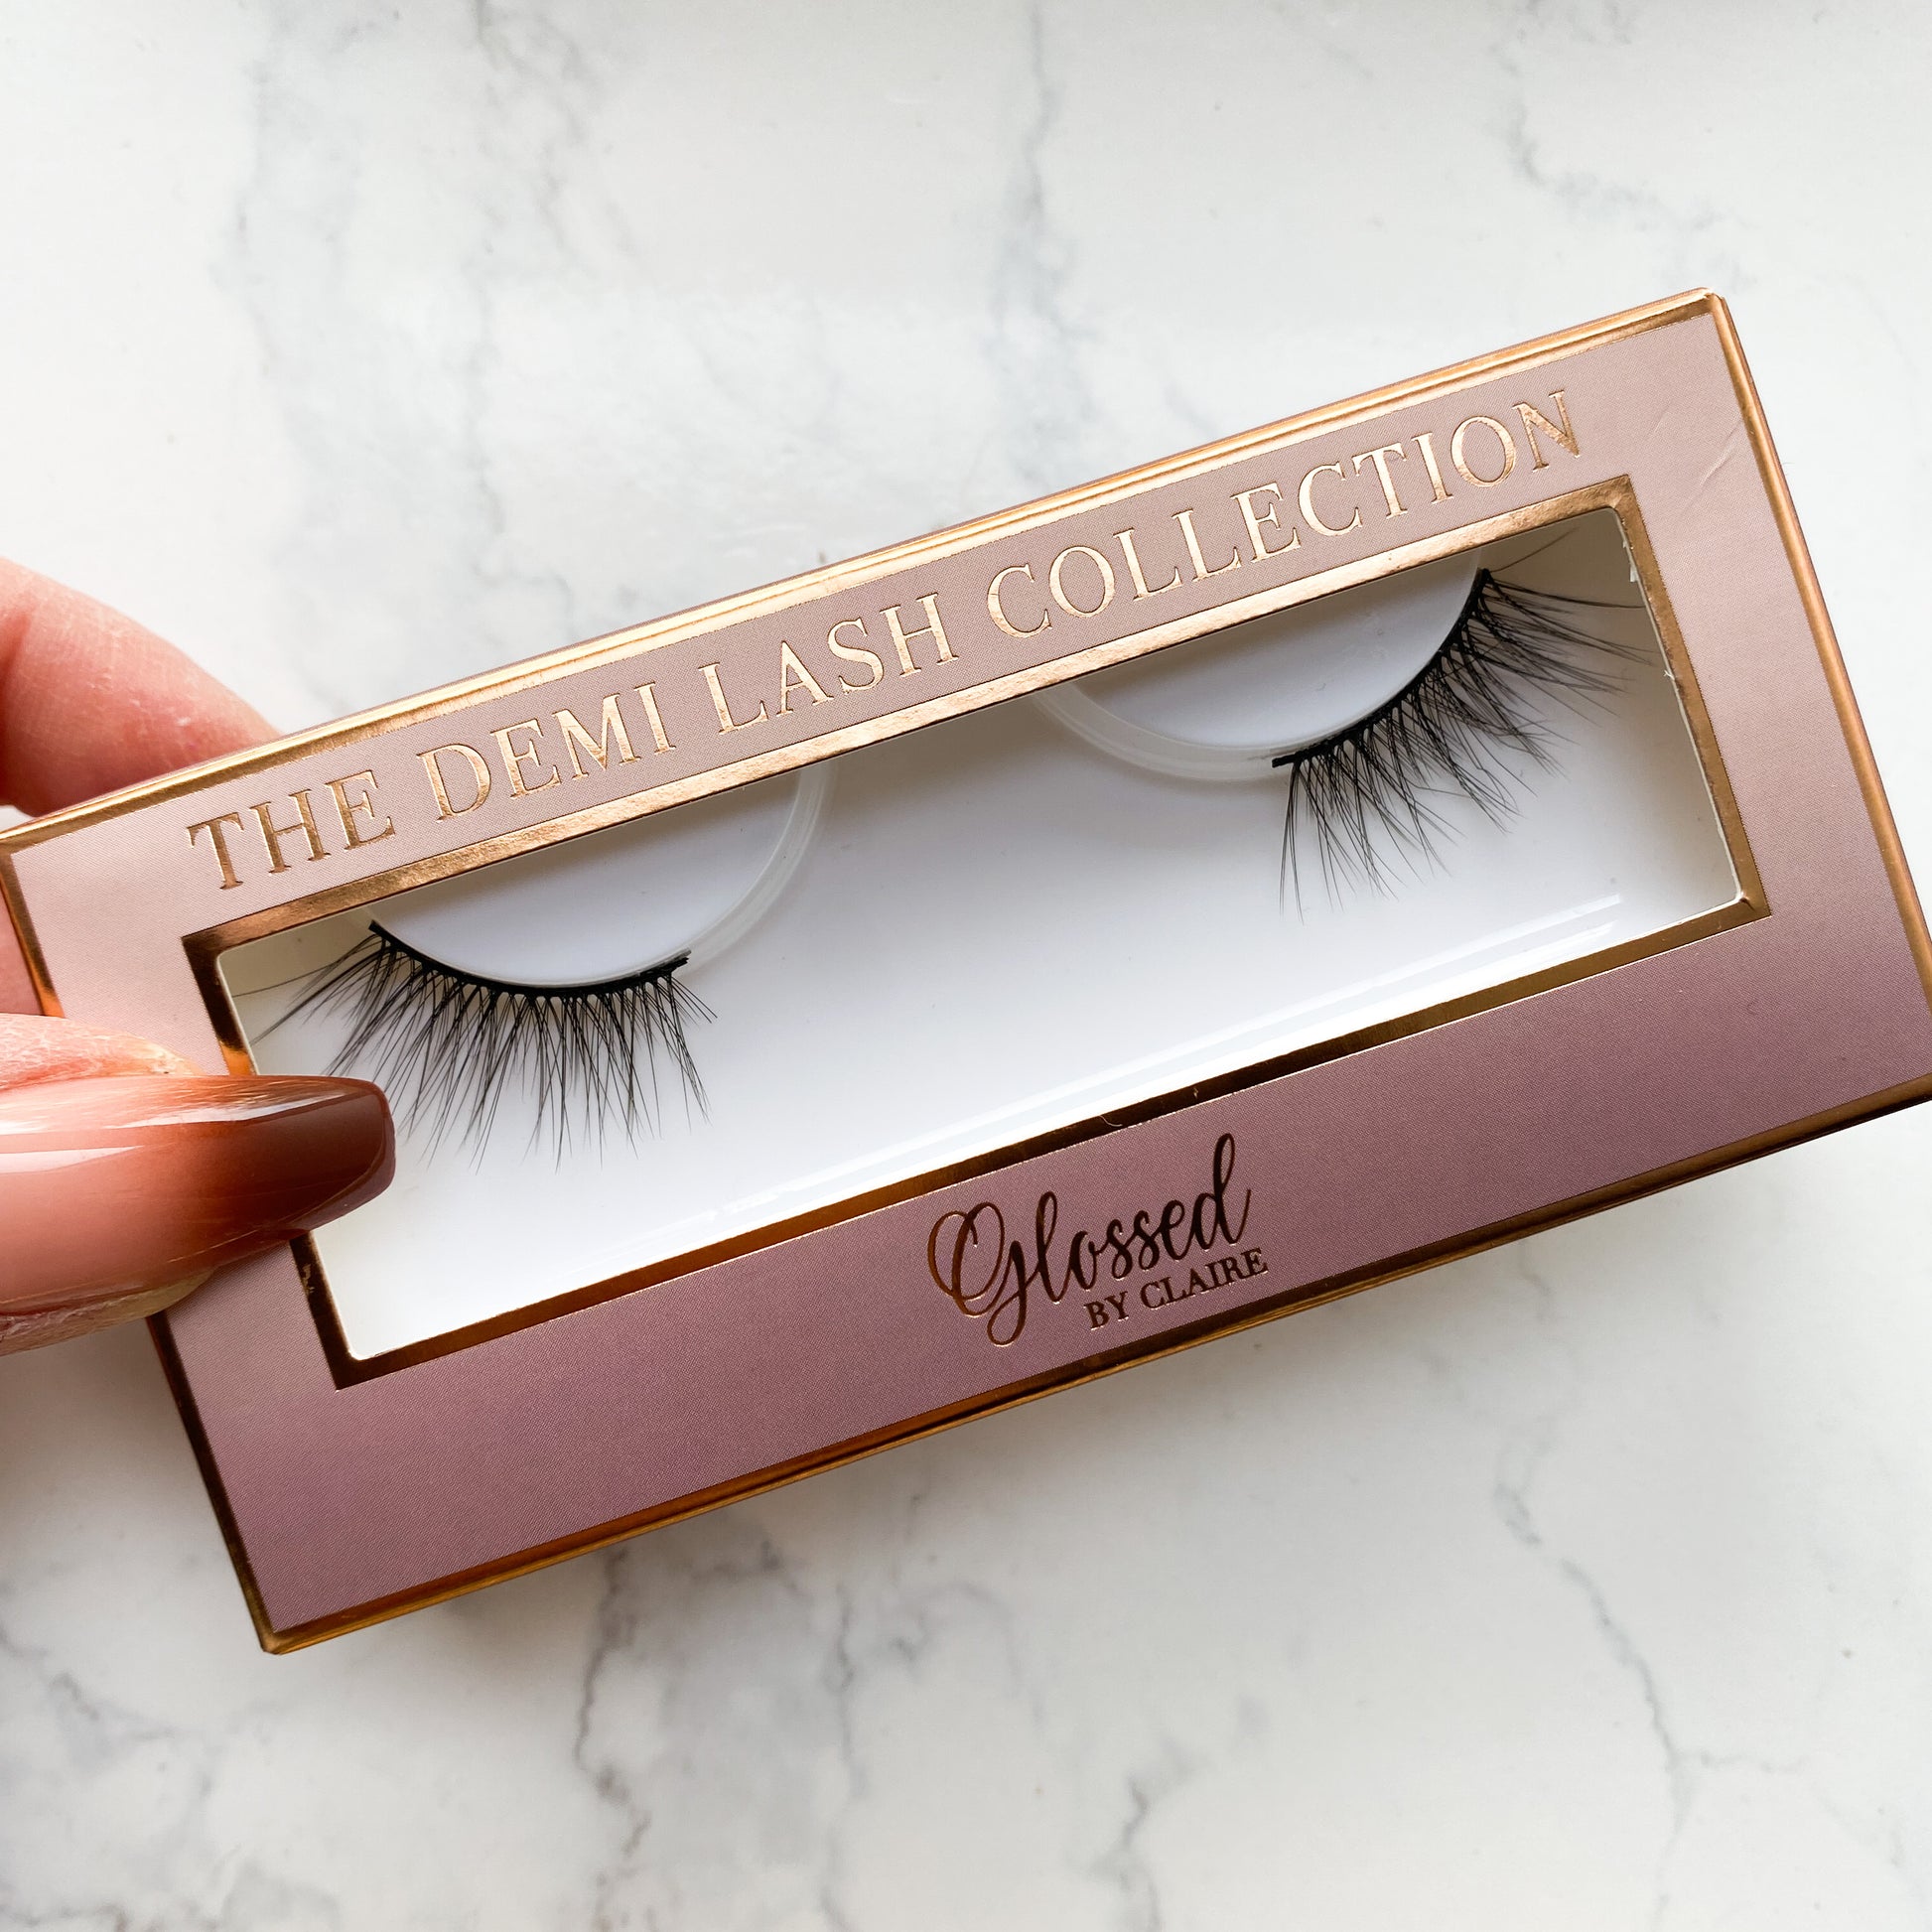 DL4 Half Lash Glossed By Claire in box